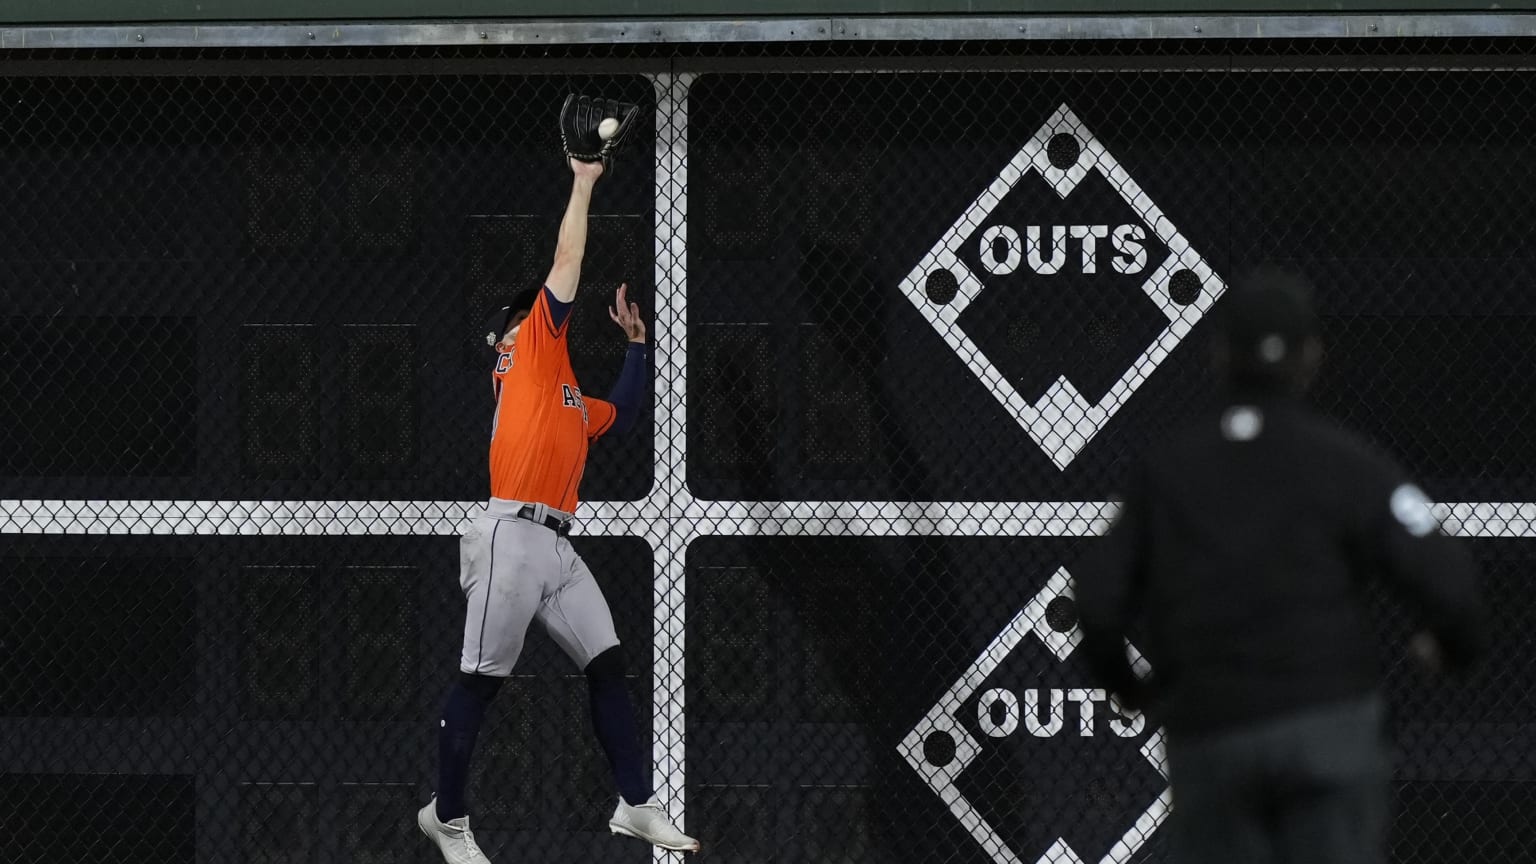 A player in an orange jersey leaps to catch a ball against a scoreboard fence